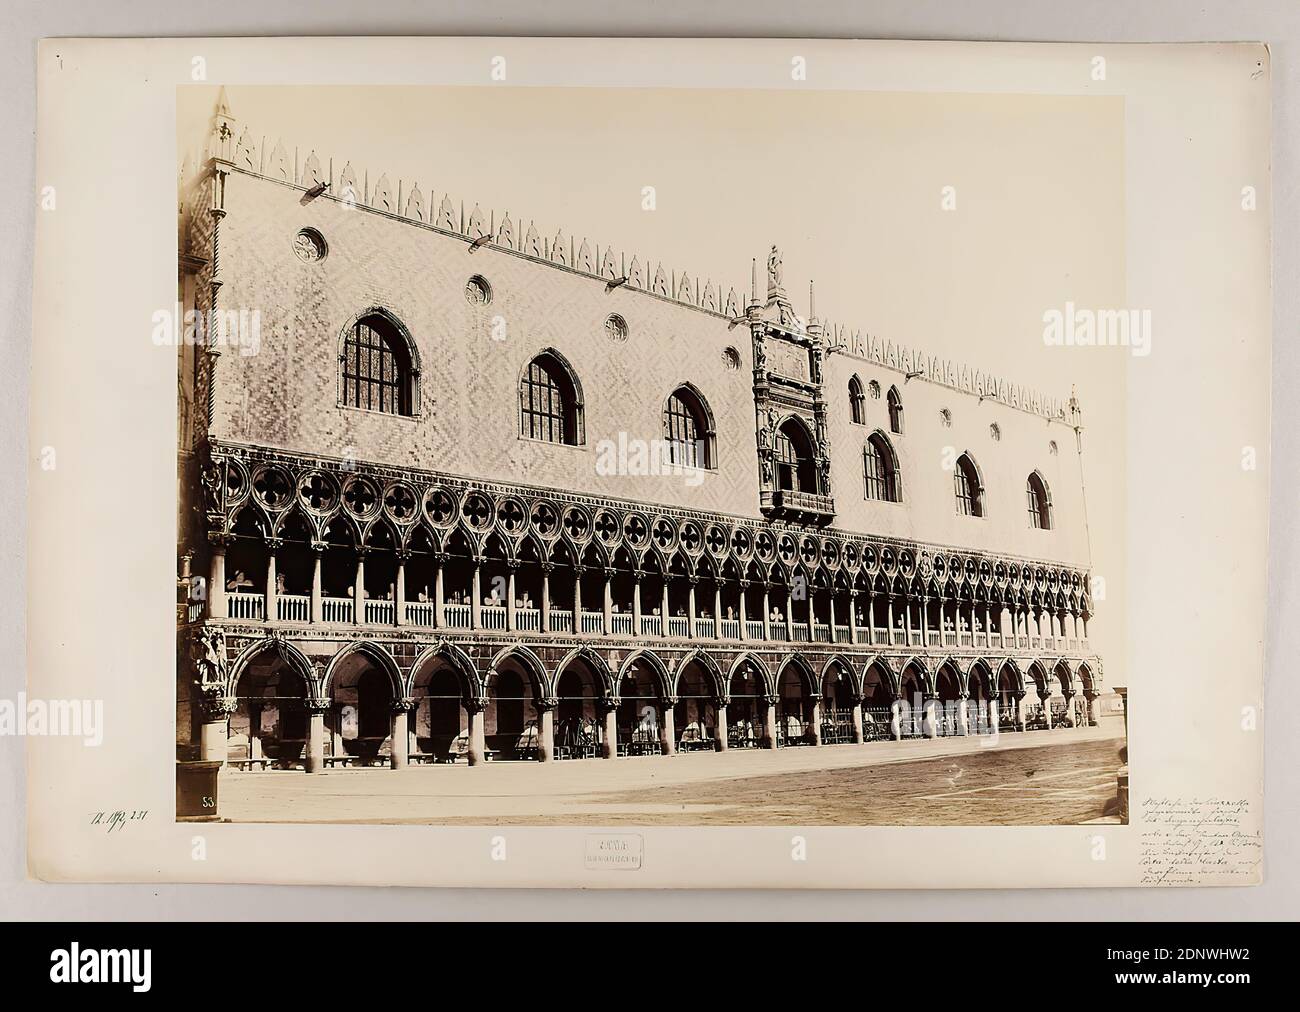 Carlo Naya, Venezia - Palazzo Ducale verso l'Antica Libreria, 1892, albumin paper, black and white positive process, sheet size: height: 27.20 cm; width: 35.20 cm, stamp engraving: Naya Fotografo, inscribed: recto: Porta della Carta. , label: verso: 53, Venezia, Palazzo Ducale verso l'Antica Libreria, architectural photography, travel photography, facade, house, building, architecture, hist. place, city, village, hist. building, locality, street Stock Photo